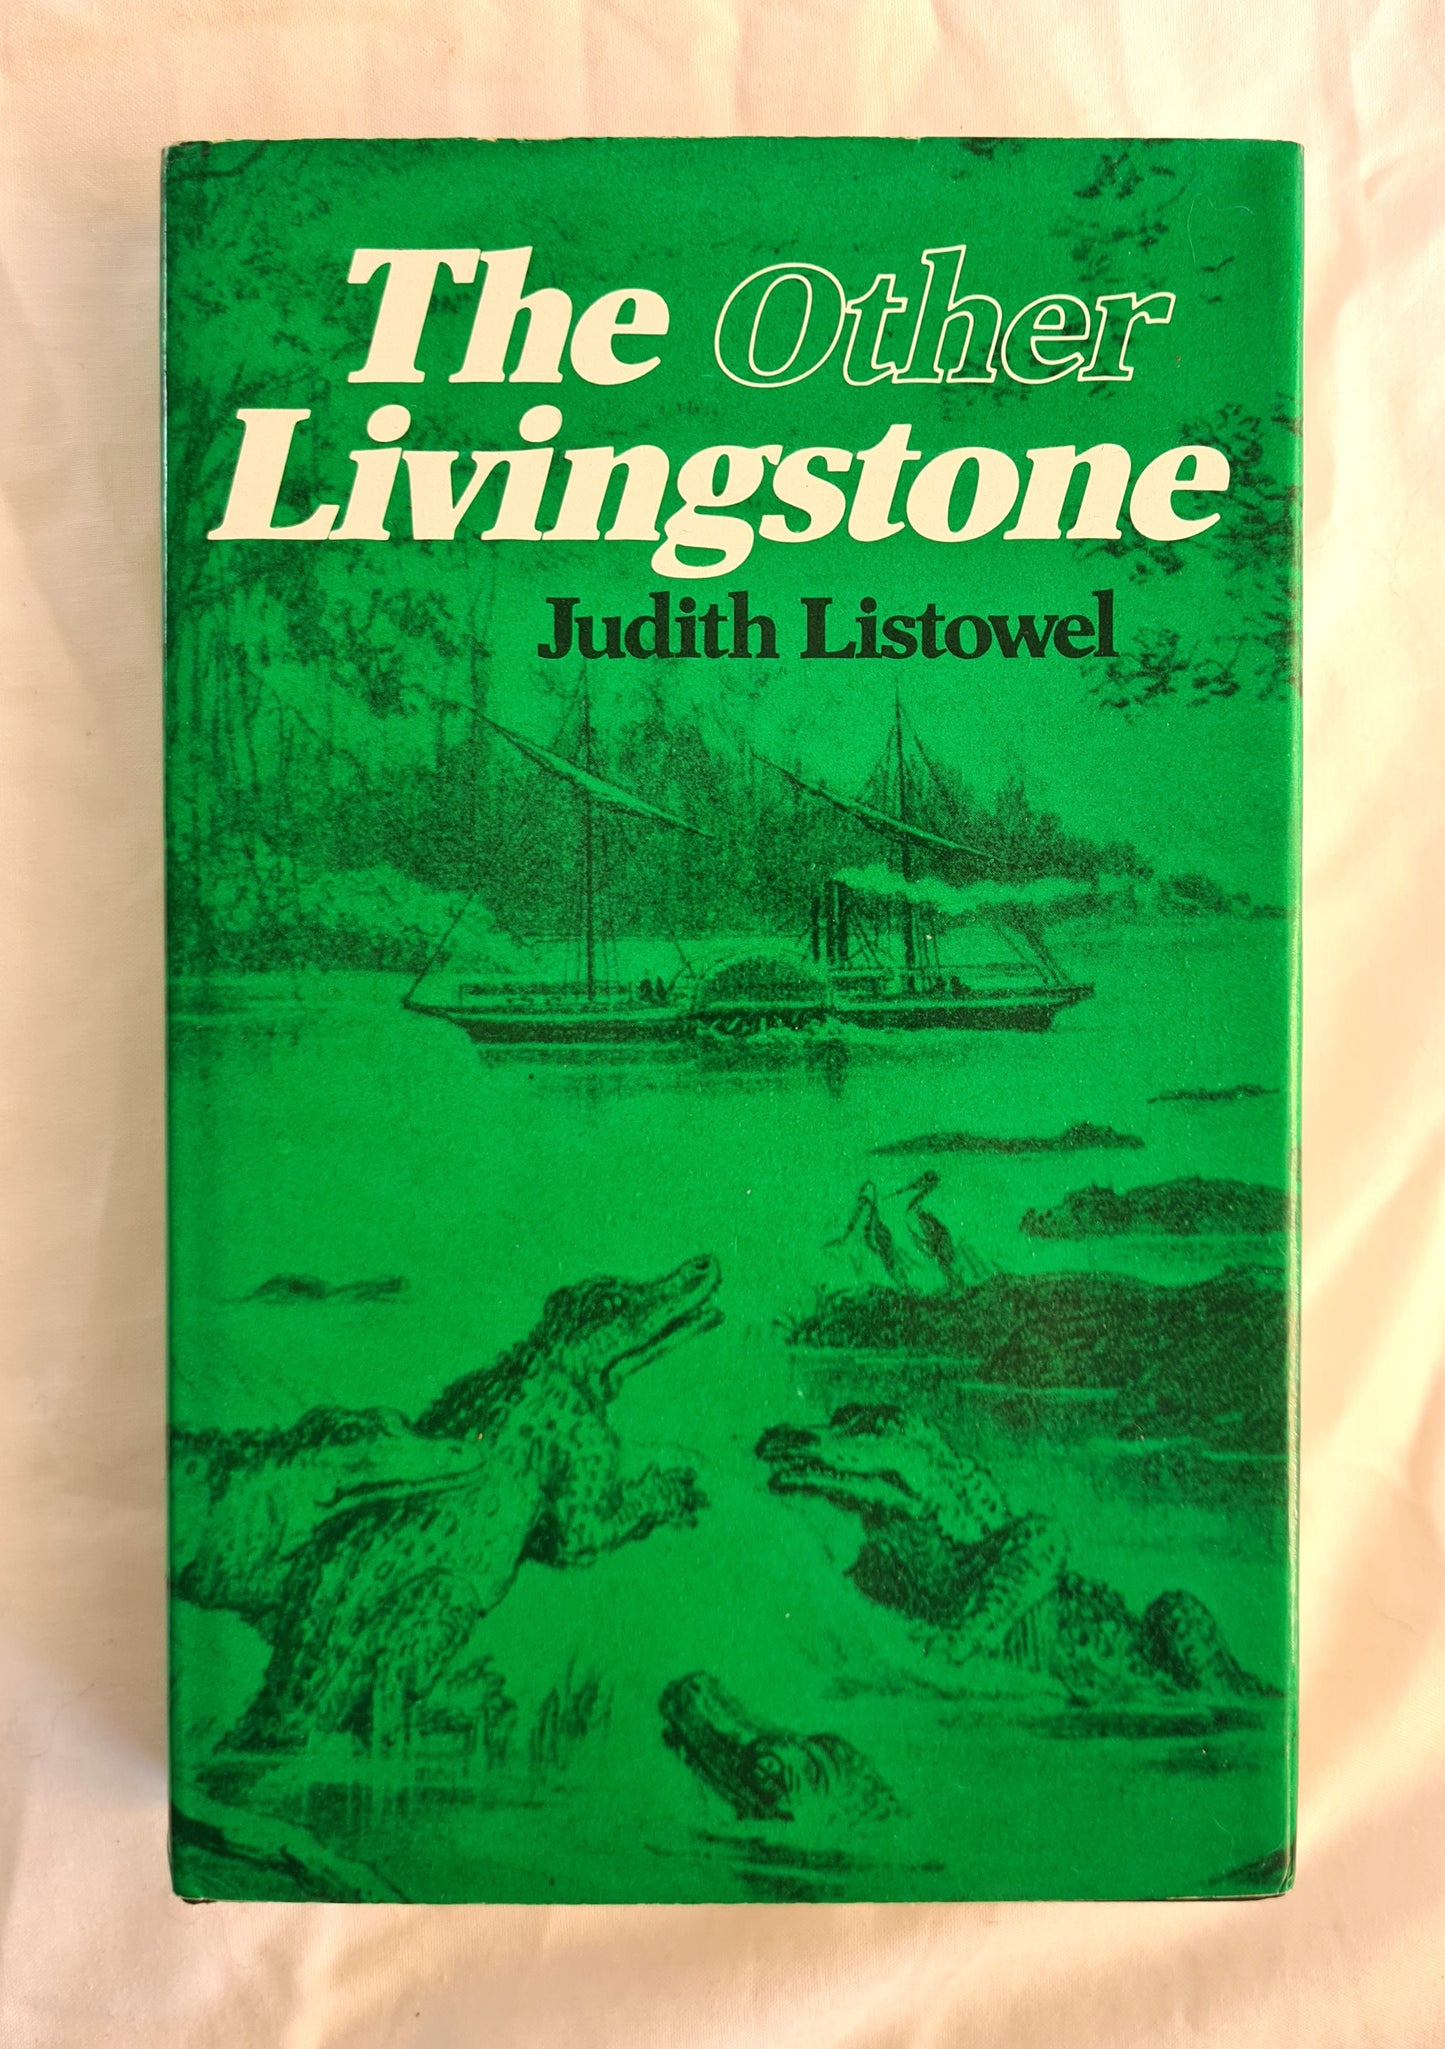 The Other Livingstone  For the first time the story can be told of four men who played a crucial part in David Livingstone’s discoveries – a part he attempted to supress.  This is a story of 19th century intrigue and rivalry which took place behind the scenes in Africa, away from the rapturous public gaze of the Victorians.  by Judith Listow